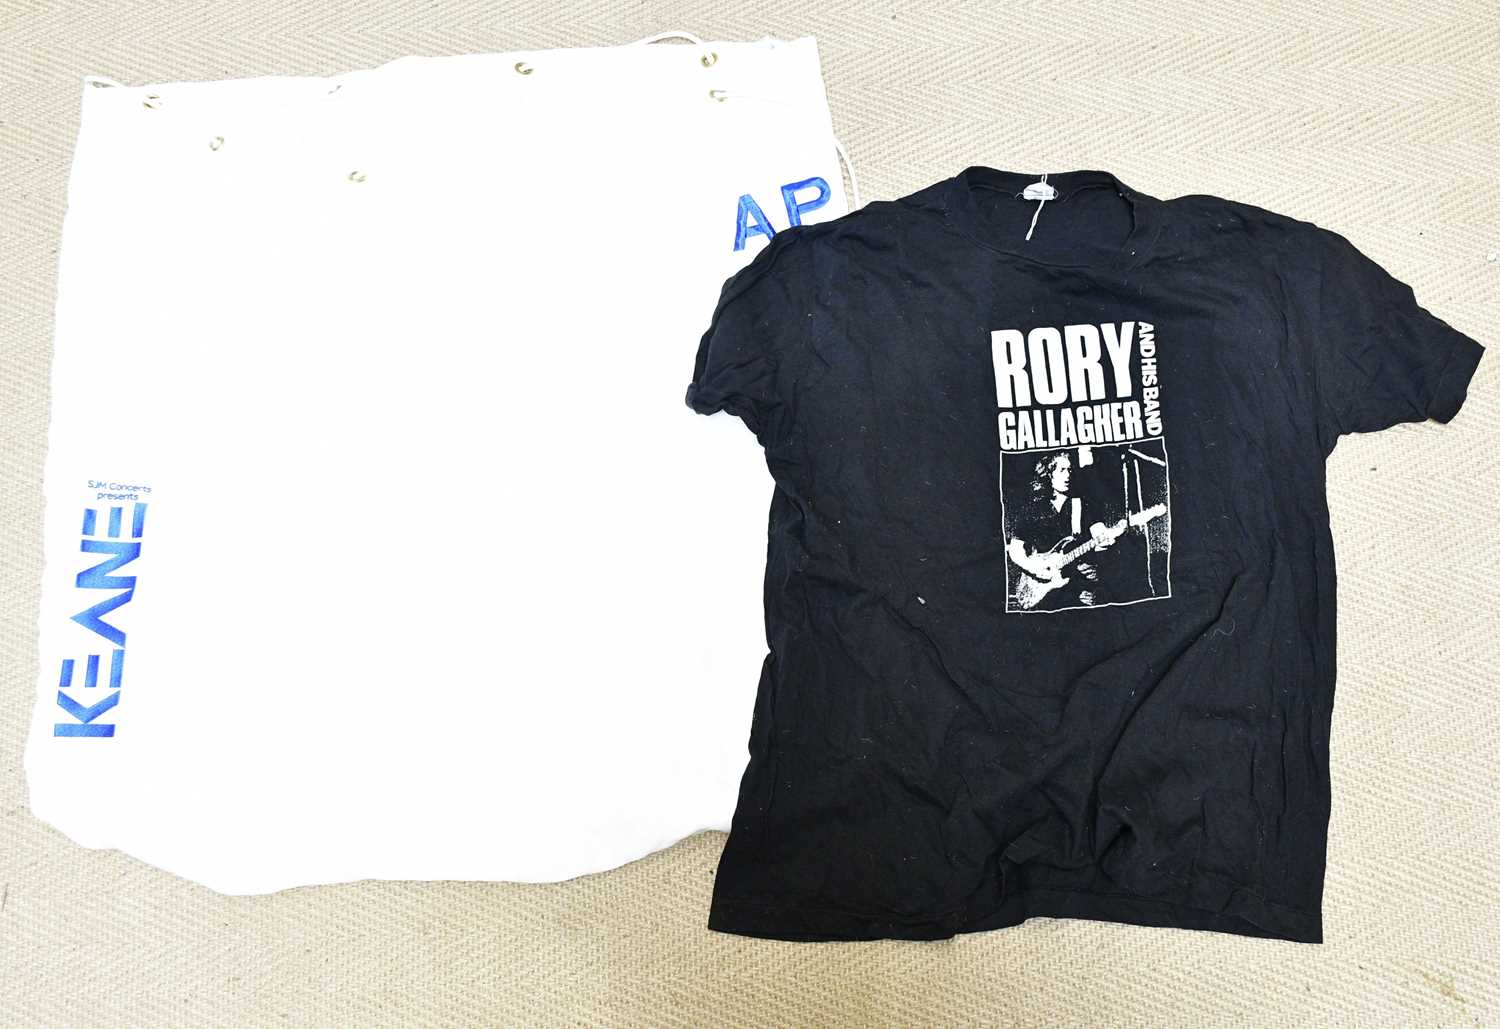 RORY GALLAGHER; a tour crew T-shirt for Europe 1984, together with a Keane laundry bag.